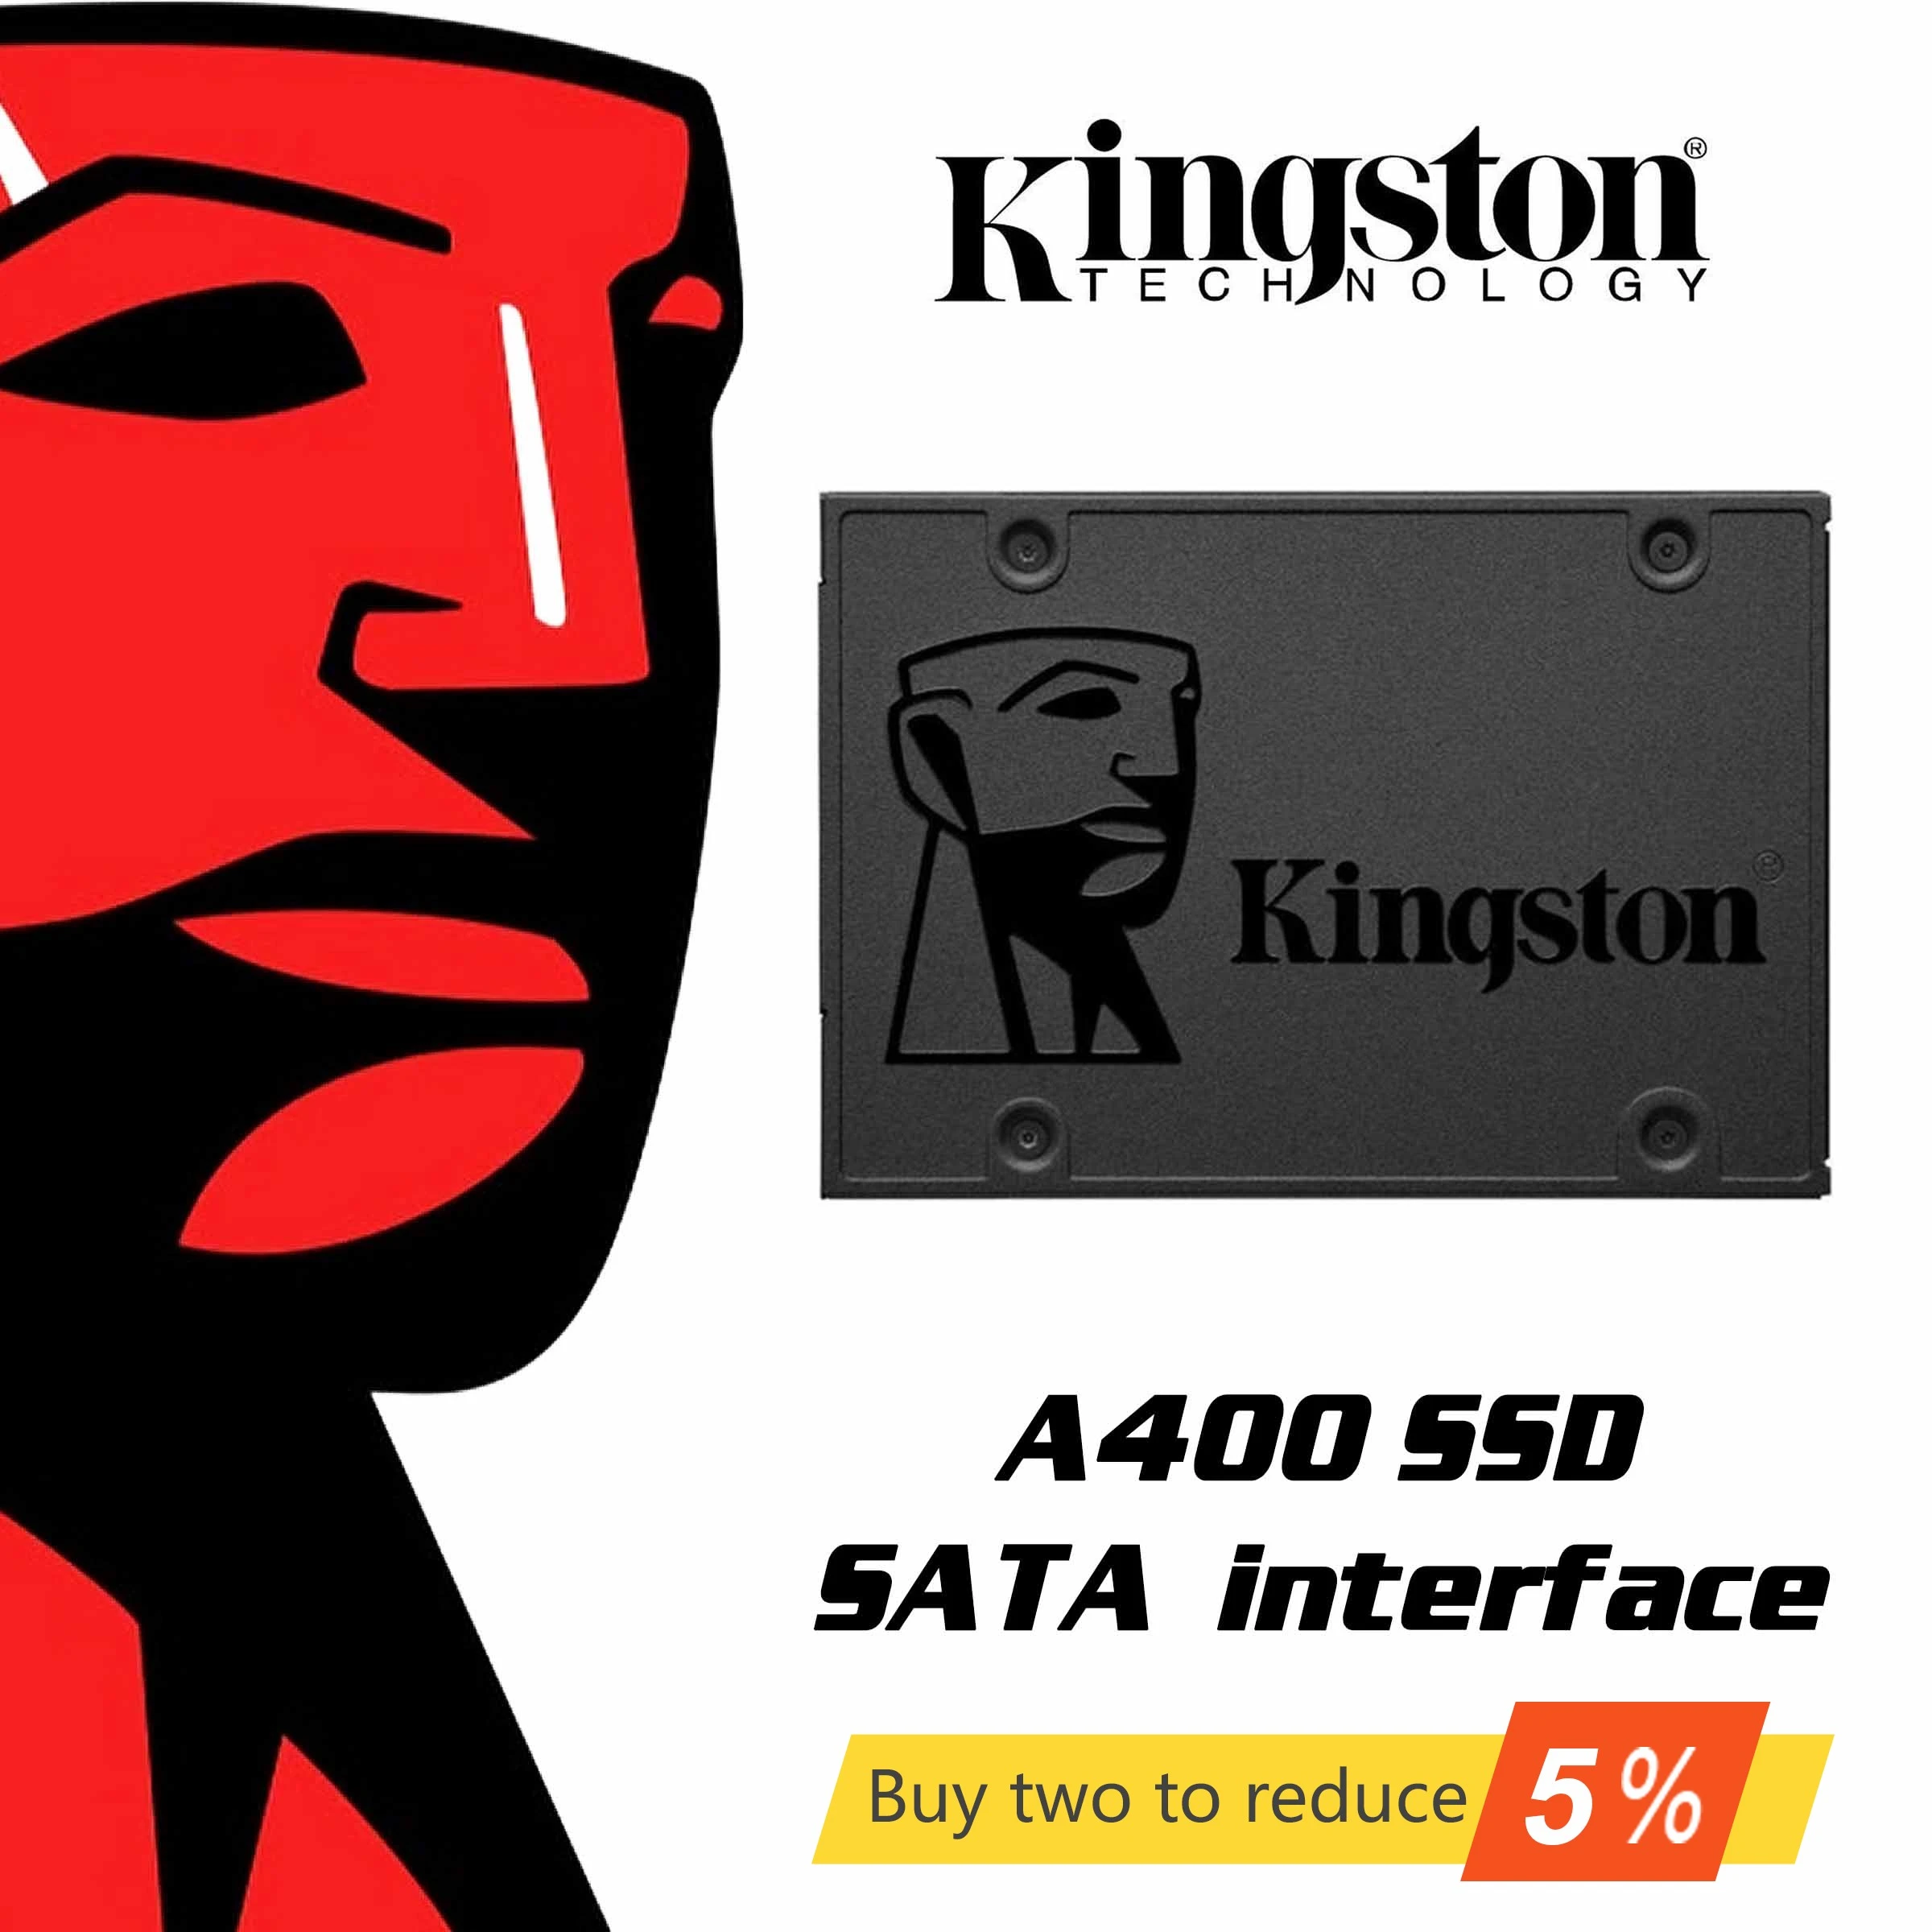 Original Kingston A400 SSD SATA3 2.5 inch 240GB 480GB Internal Solid State Drive HDD Hard Drive Disk SSD For PC Laptop Computer